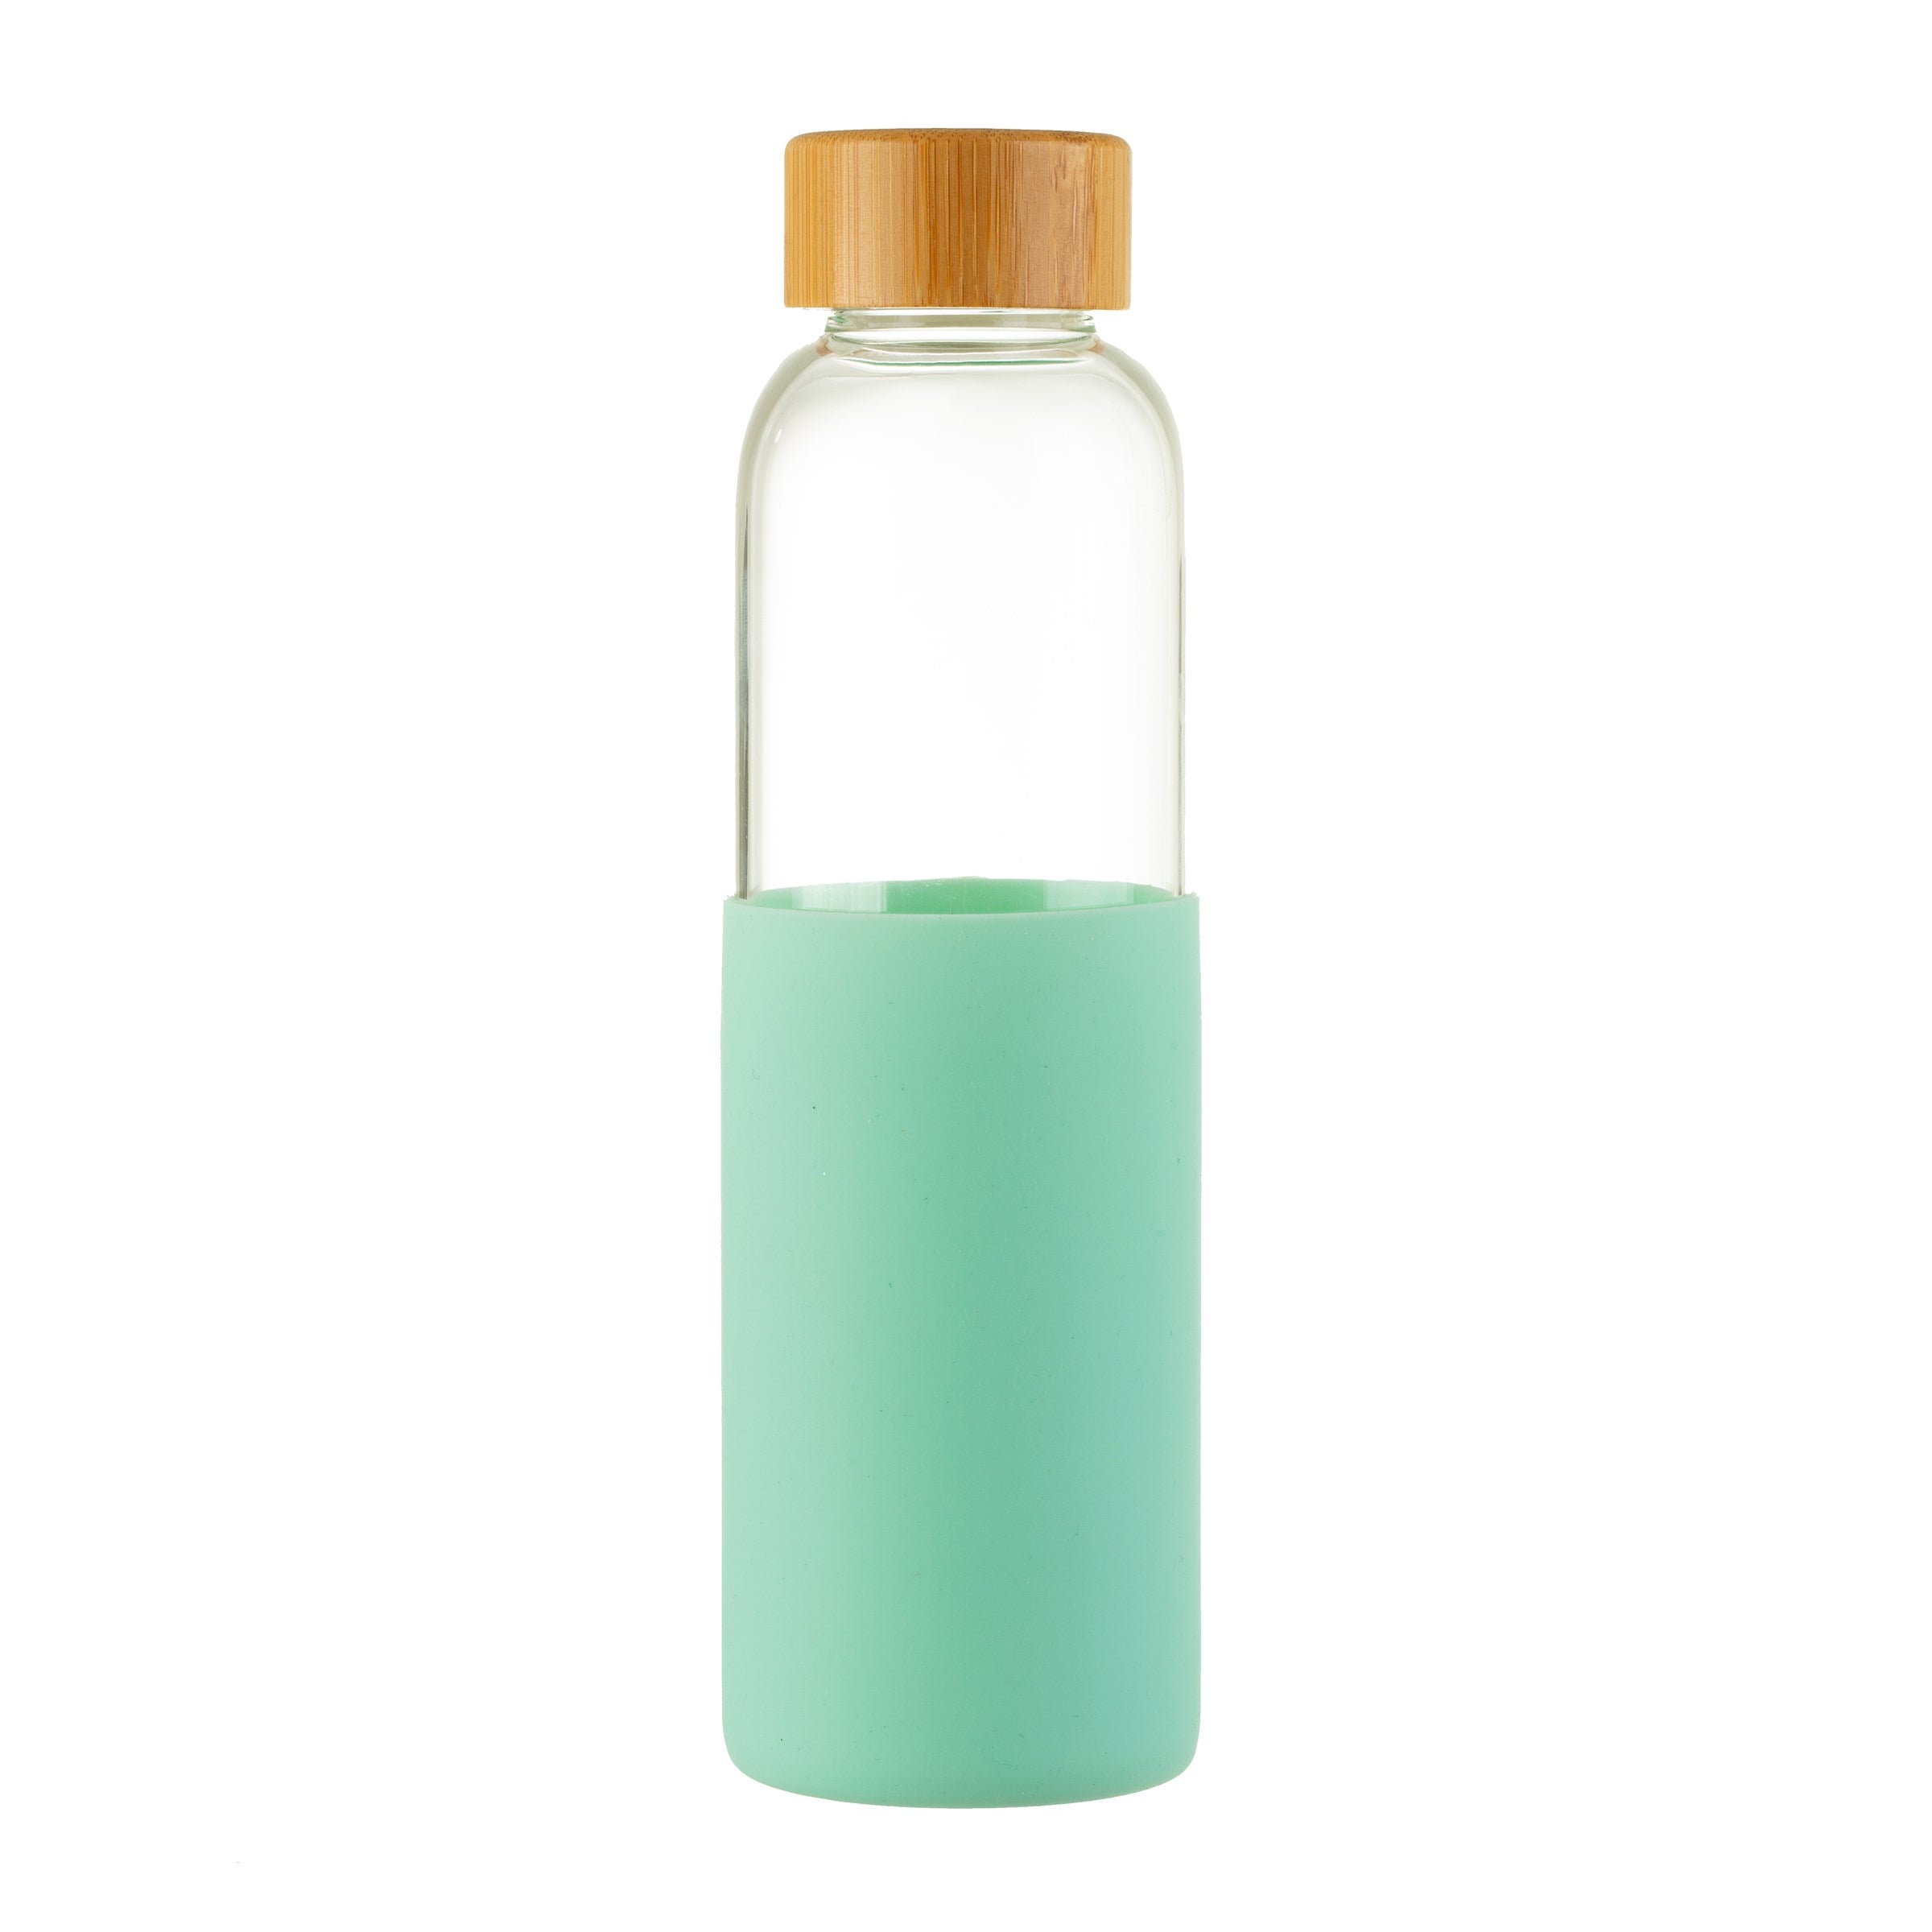 Sass & Belle Mint Green Glass Water Bottle with Silicone Sleeve - The Cooks Cupboard Ltd